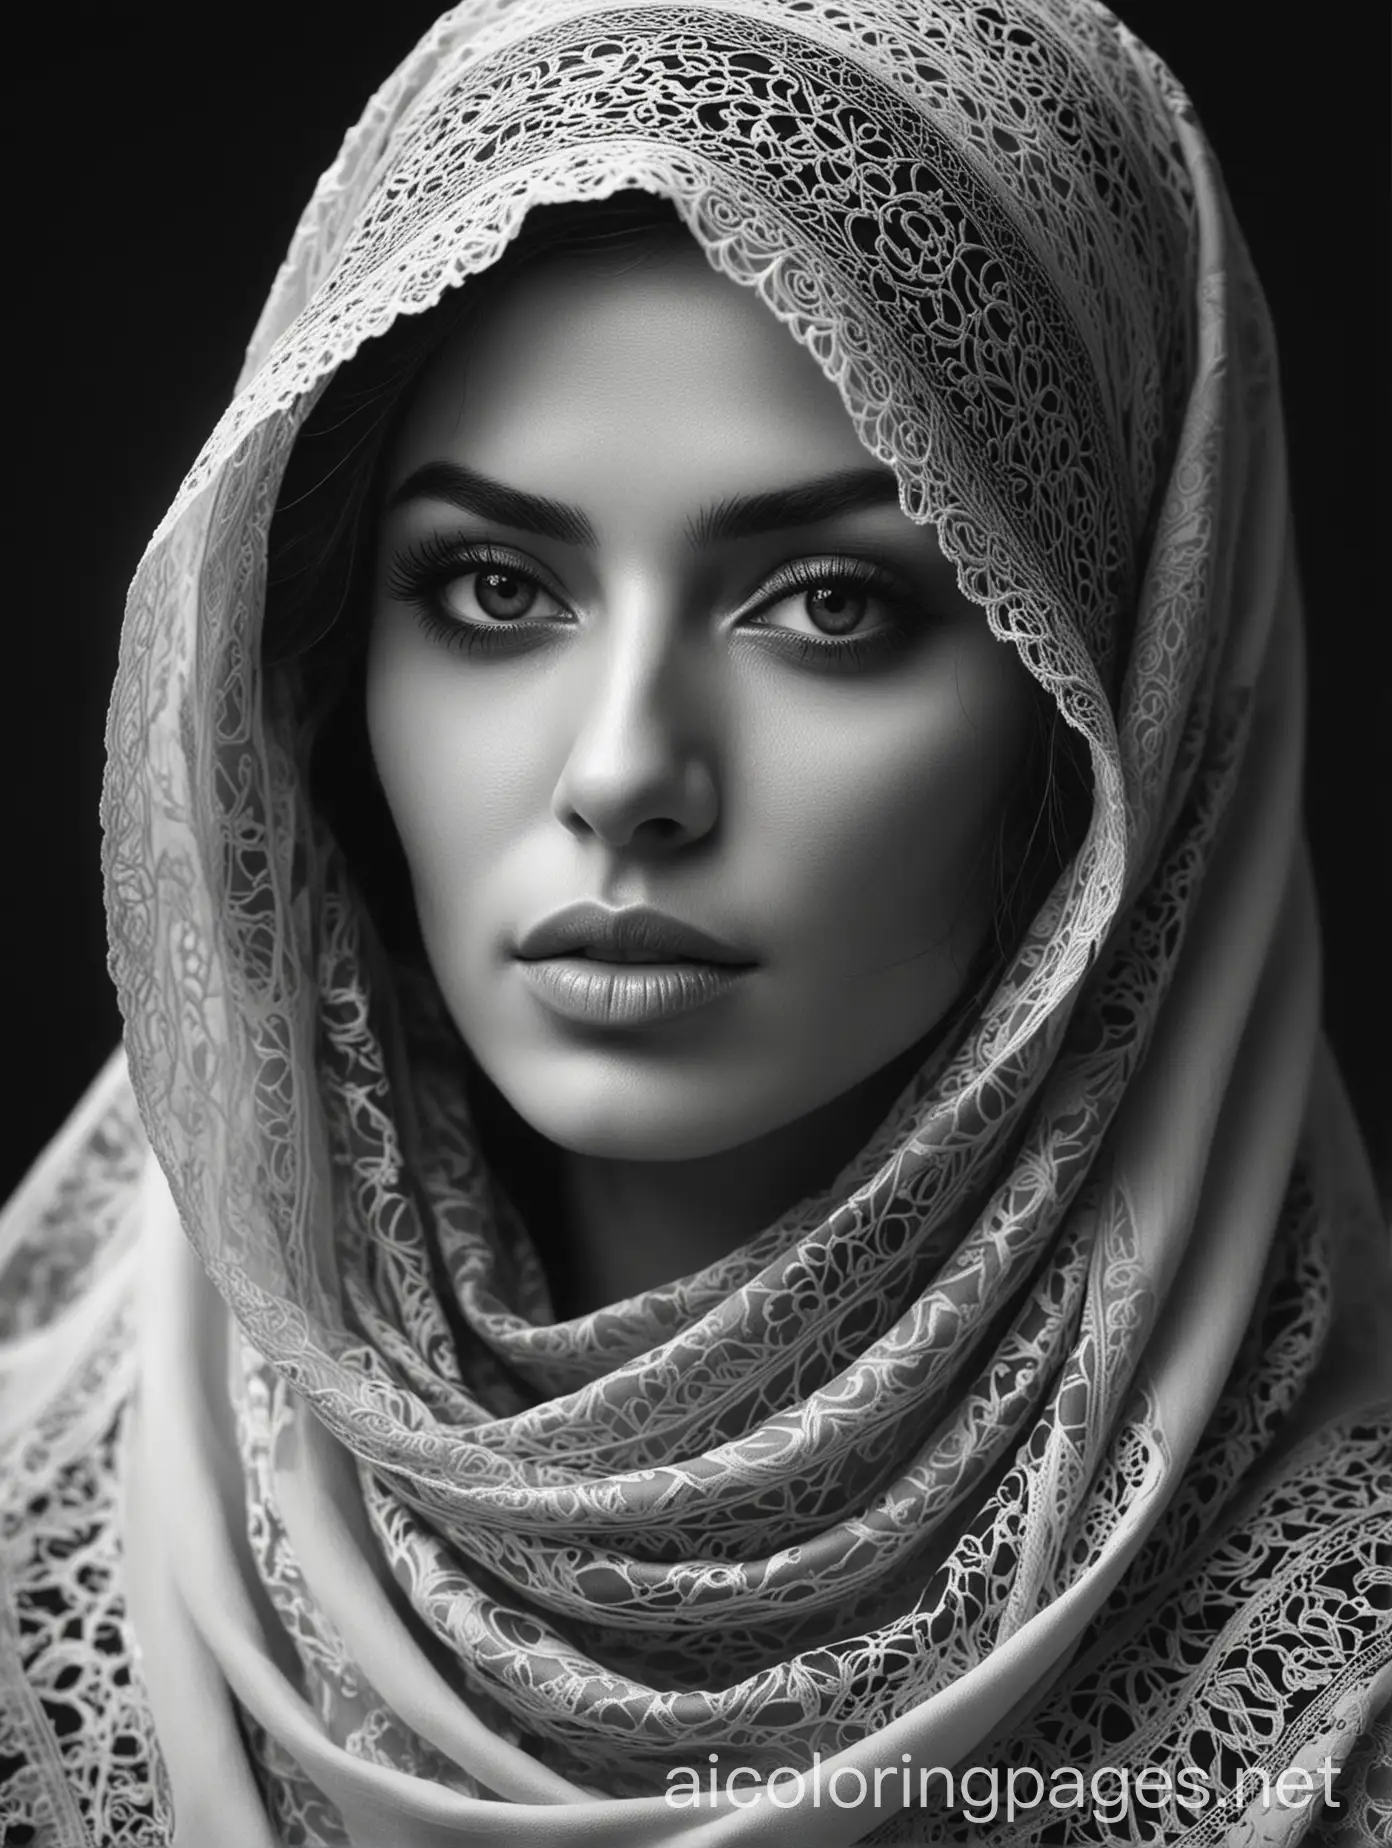 a black and white photo of a woman wearing a hat, beautiful artwork, veiled, beautiful art, beautiful woman, gorgeous art, gorgeous woman, beautiful burqa's woman, arabian art, beautiful arab woman, monochromatic airbrush painting, arabian beauty, beautiful and mysterious, black & white art, stunning artwork, elegant woman, mysterious woman, painting of beautiful, Coloring Page, black and white, line art, white background, Simplicity, Ample White Space. The background of the coloring page is plain white to make it easy for young children to color within the lines. The outlines of all the subjects are easy to distinguish, making it simple for kids to color without too much difficulty